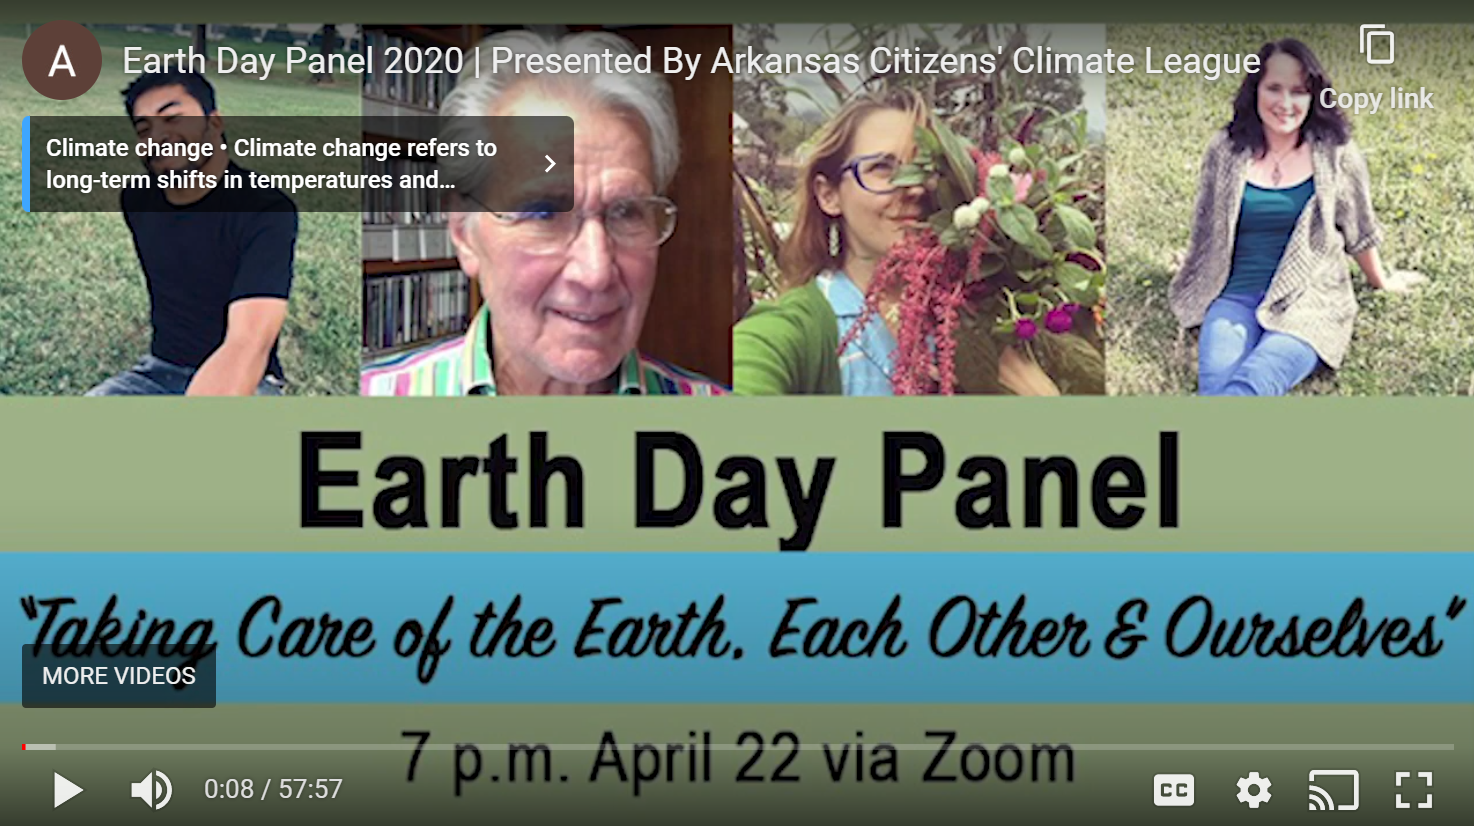 “Taking Care of the Earth, Each Other & Ourselves” Panel